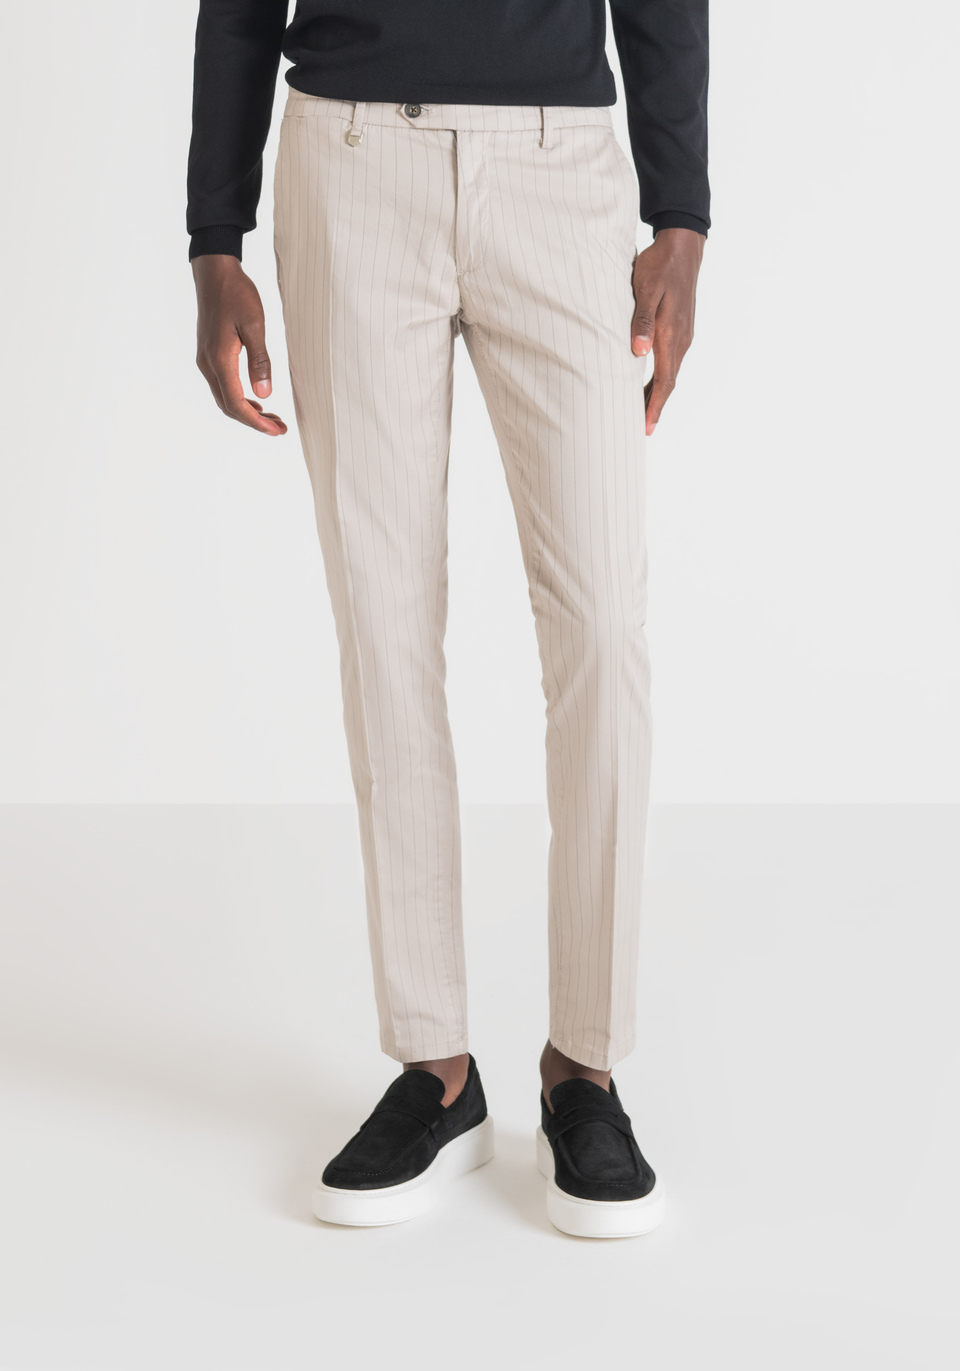 SKINNY-FIT “BRYAN” TROUSERS IN STRIPED COTTON AND LINEN - Antony Morato Online Shop